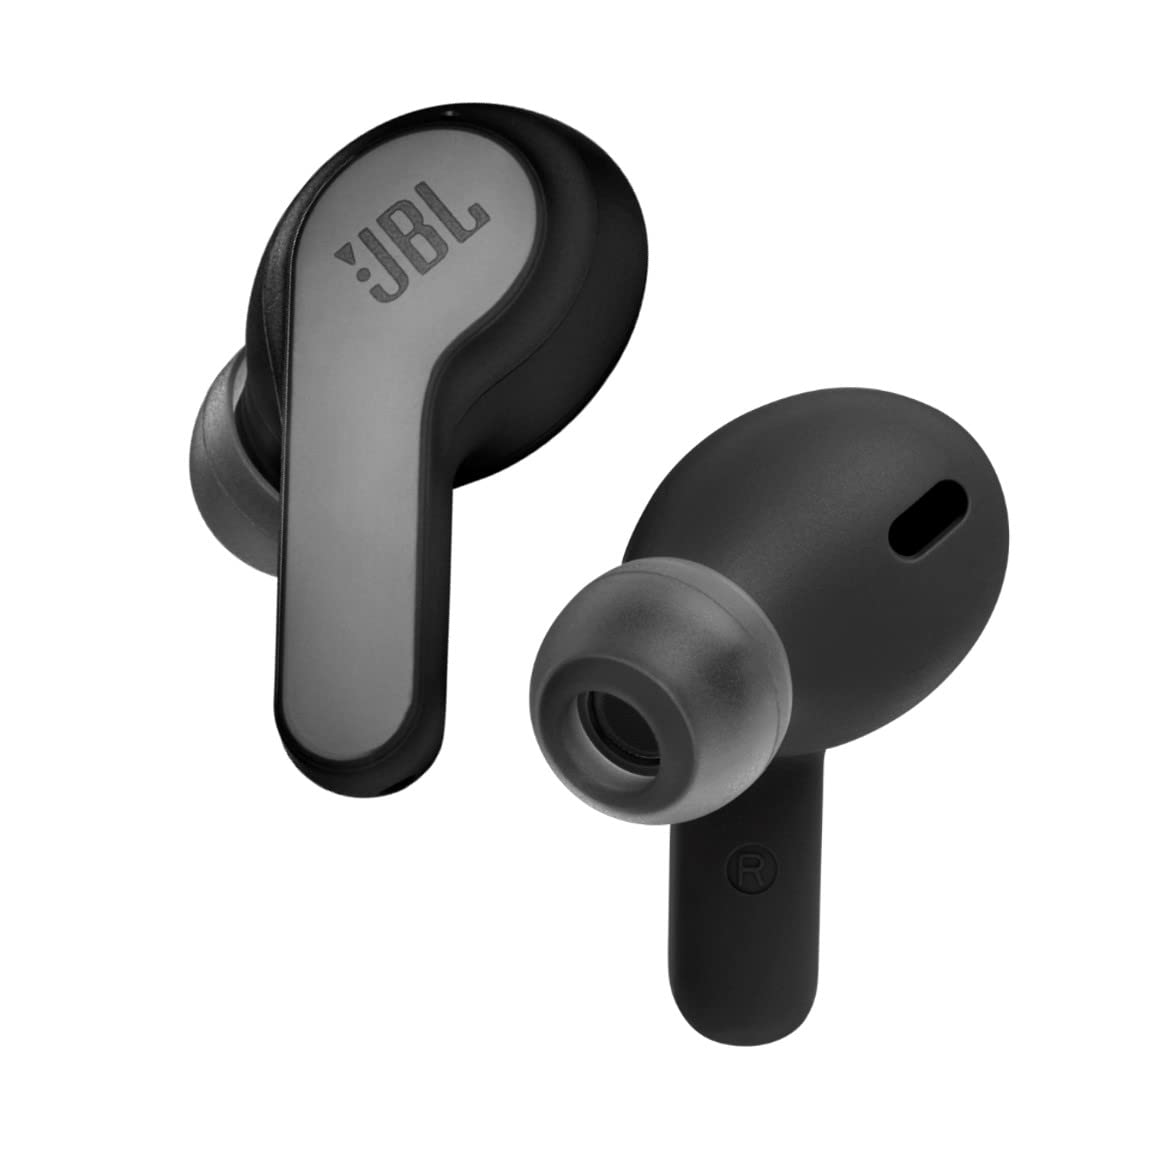 JBL Wave 200 TWS, Bluetooth Truly Wireless in Ear Earbuds with Mic Deep Bass Sound, up to 20Hrs Playtime, use Single Earbud or Both, 5.0, Type C & Voice Assistant Support for Mobile Phones (Black)